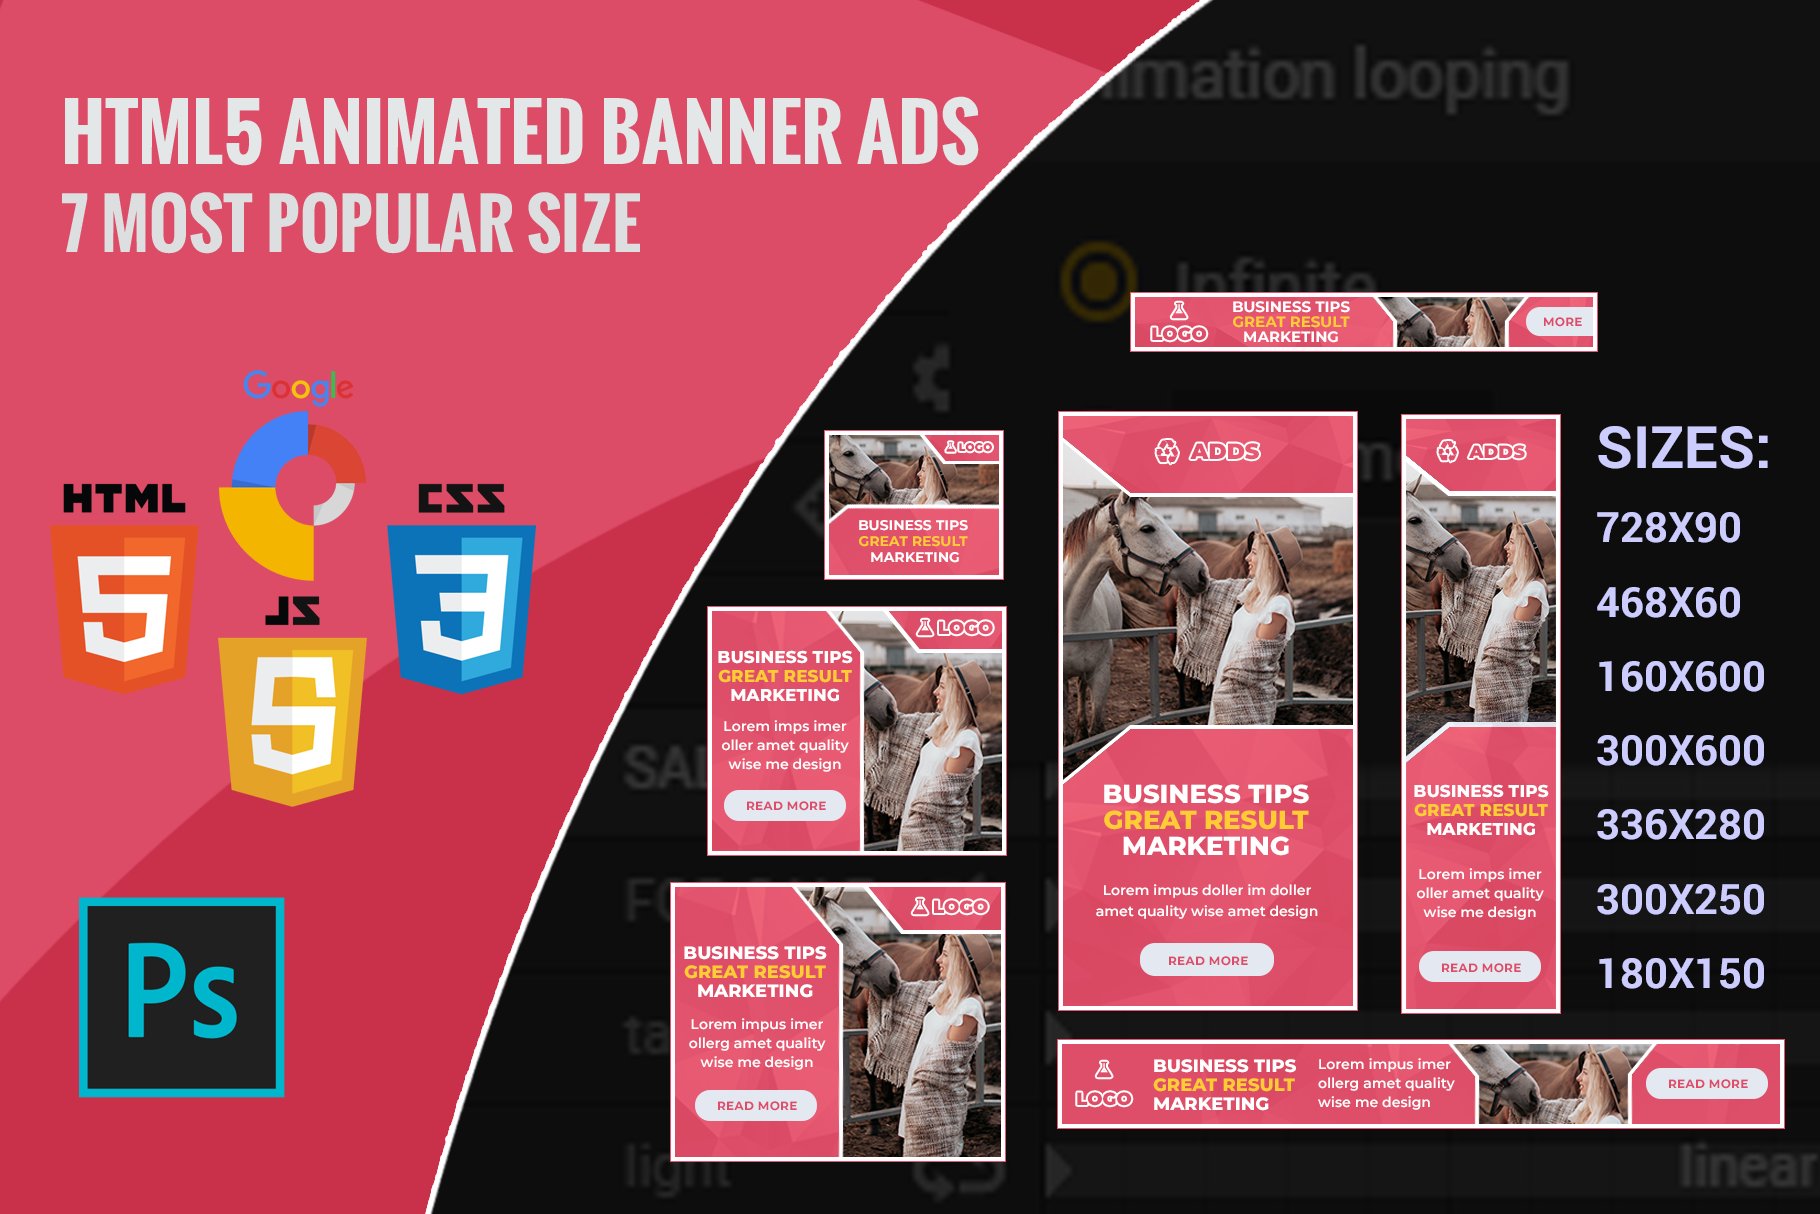 Rosy - Animated Html5 Banner Ads cover image.